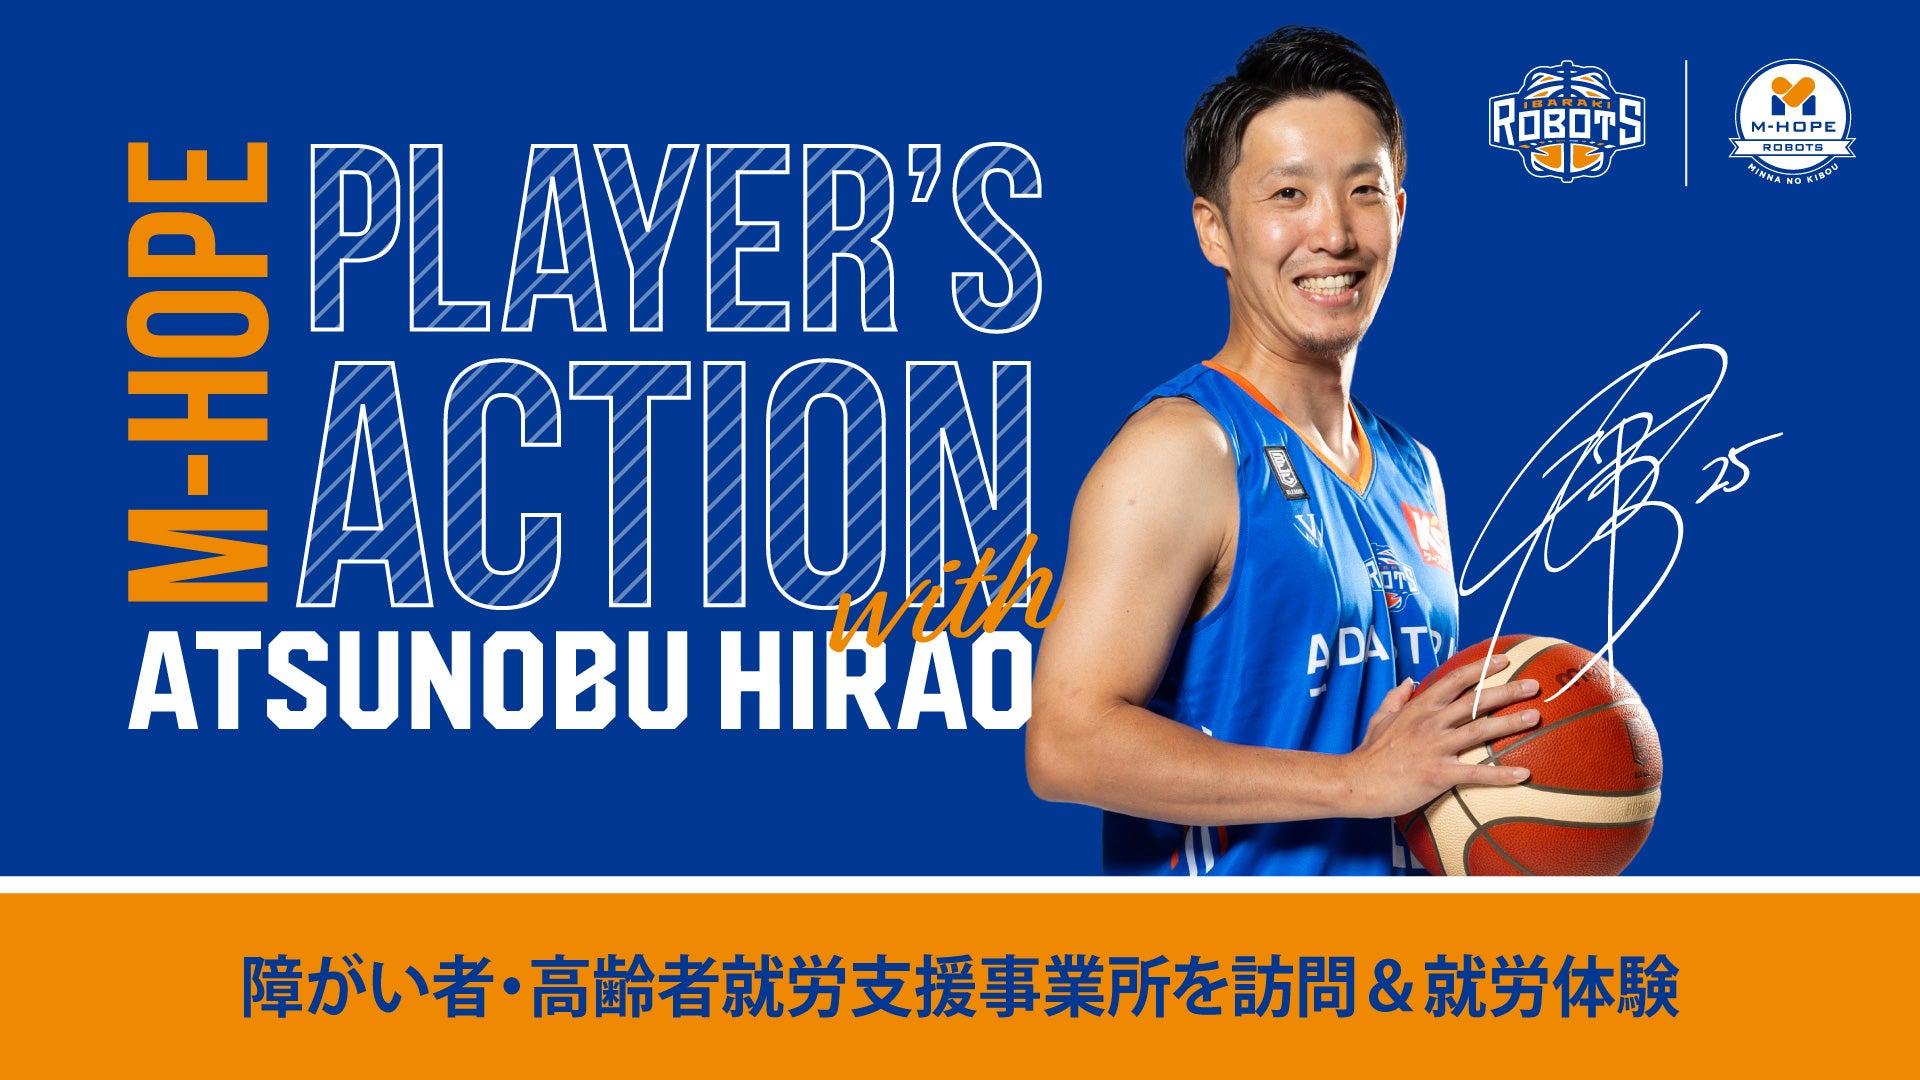 M-HOPE Player’s Action with ラオ